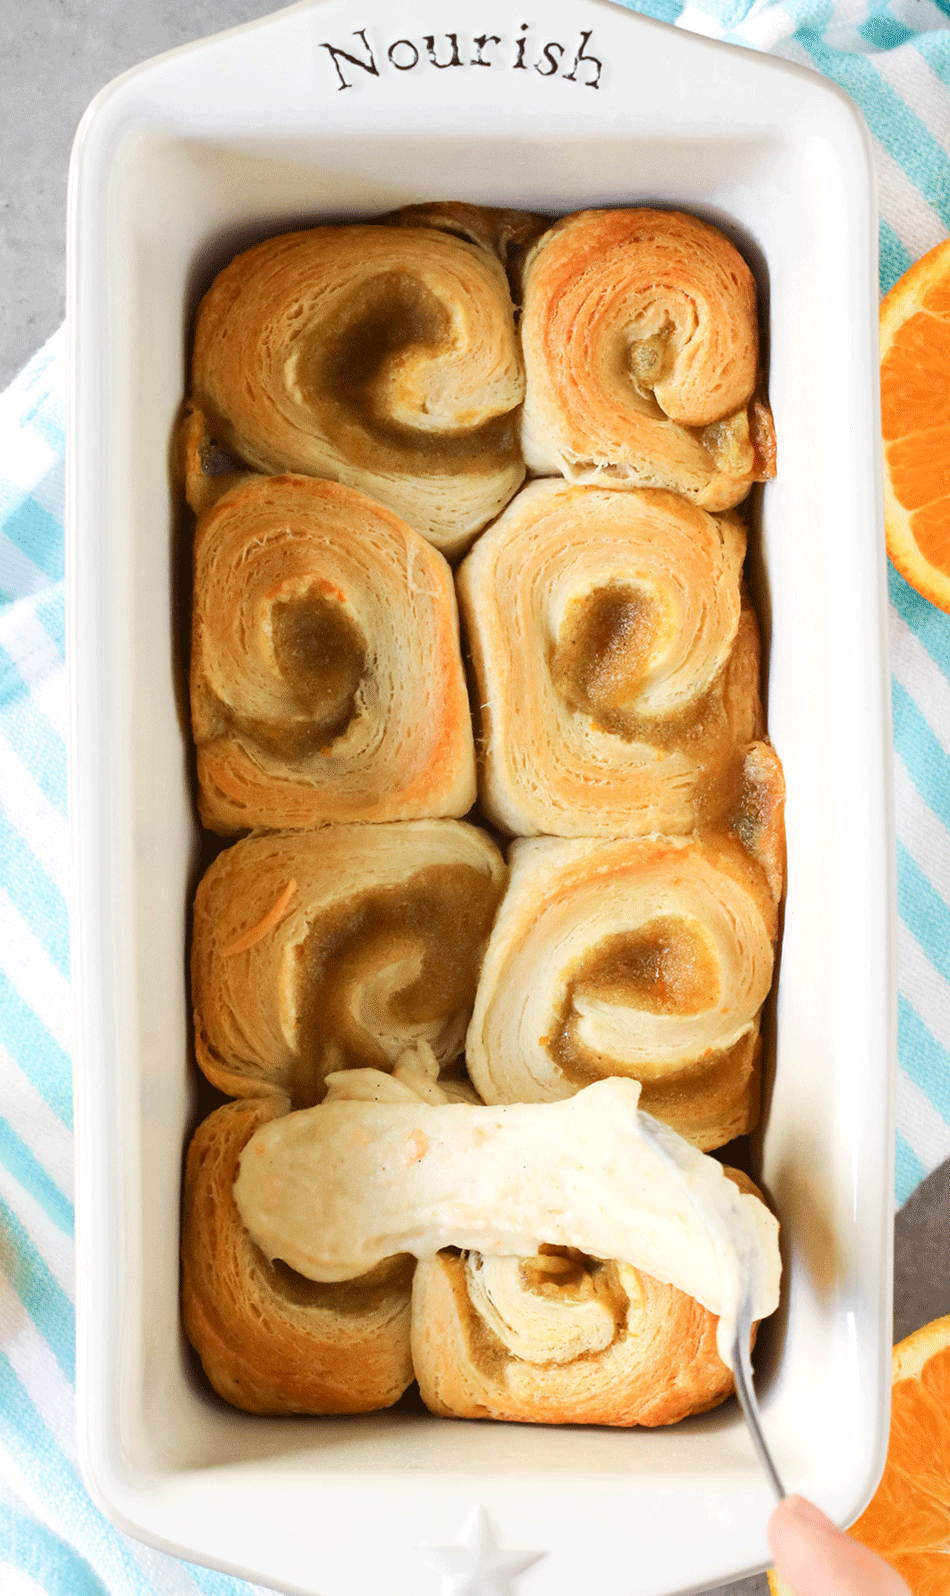 These easy five ingredient Orange Sweet Rolls are so soft, sweet, and fluffy, you'd never know they're low fat, dairy free, and vegan with no sugar added!